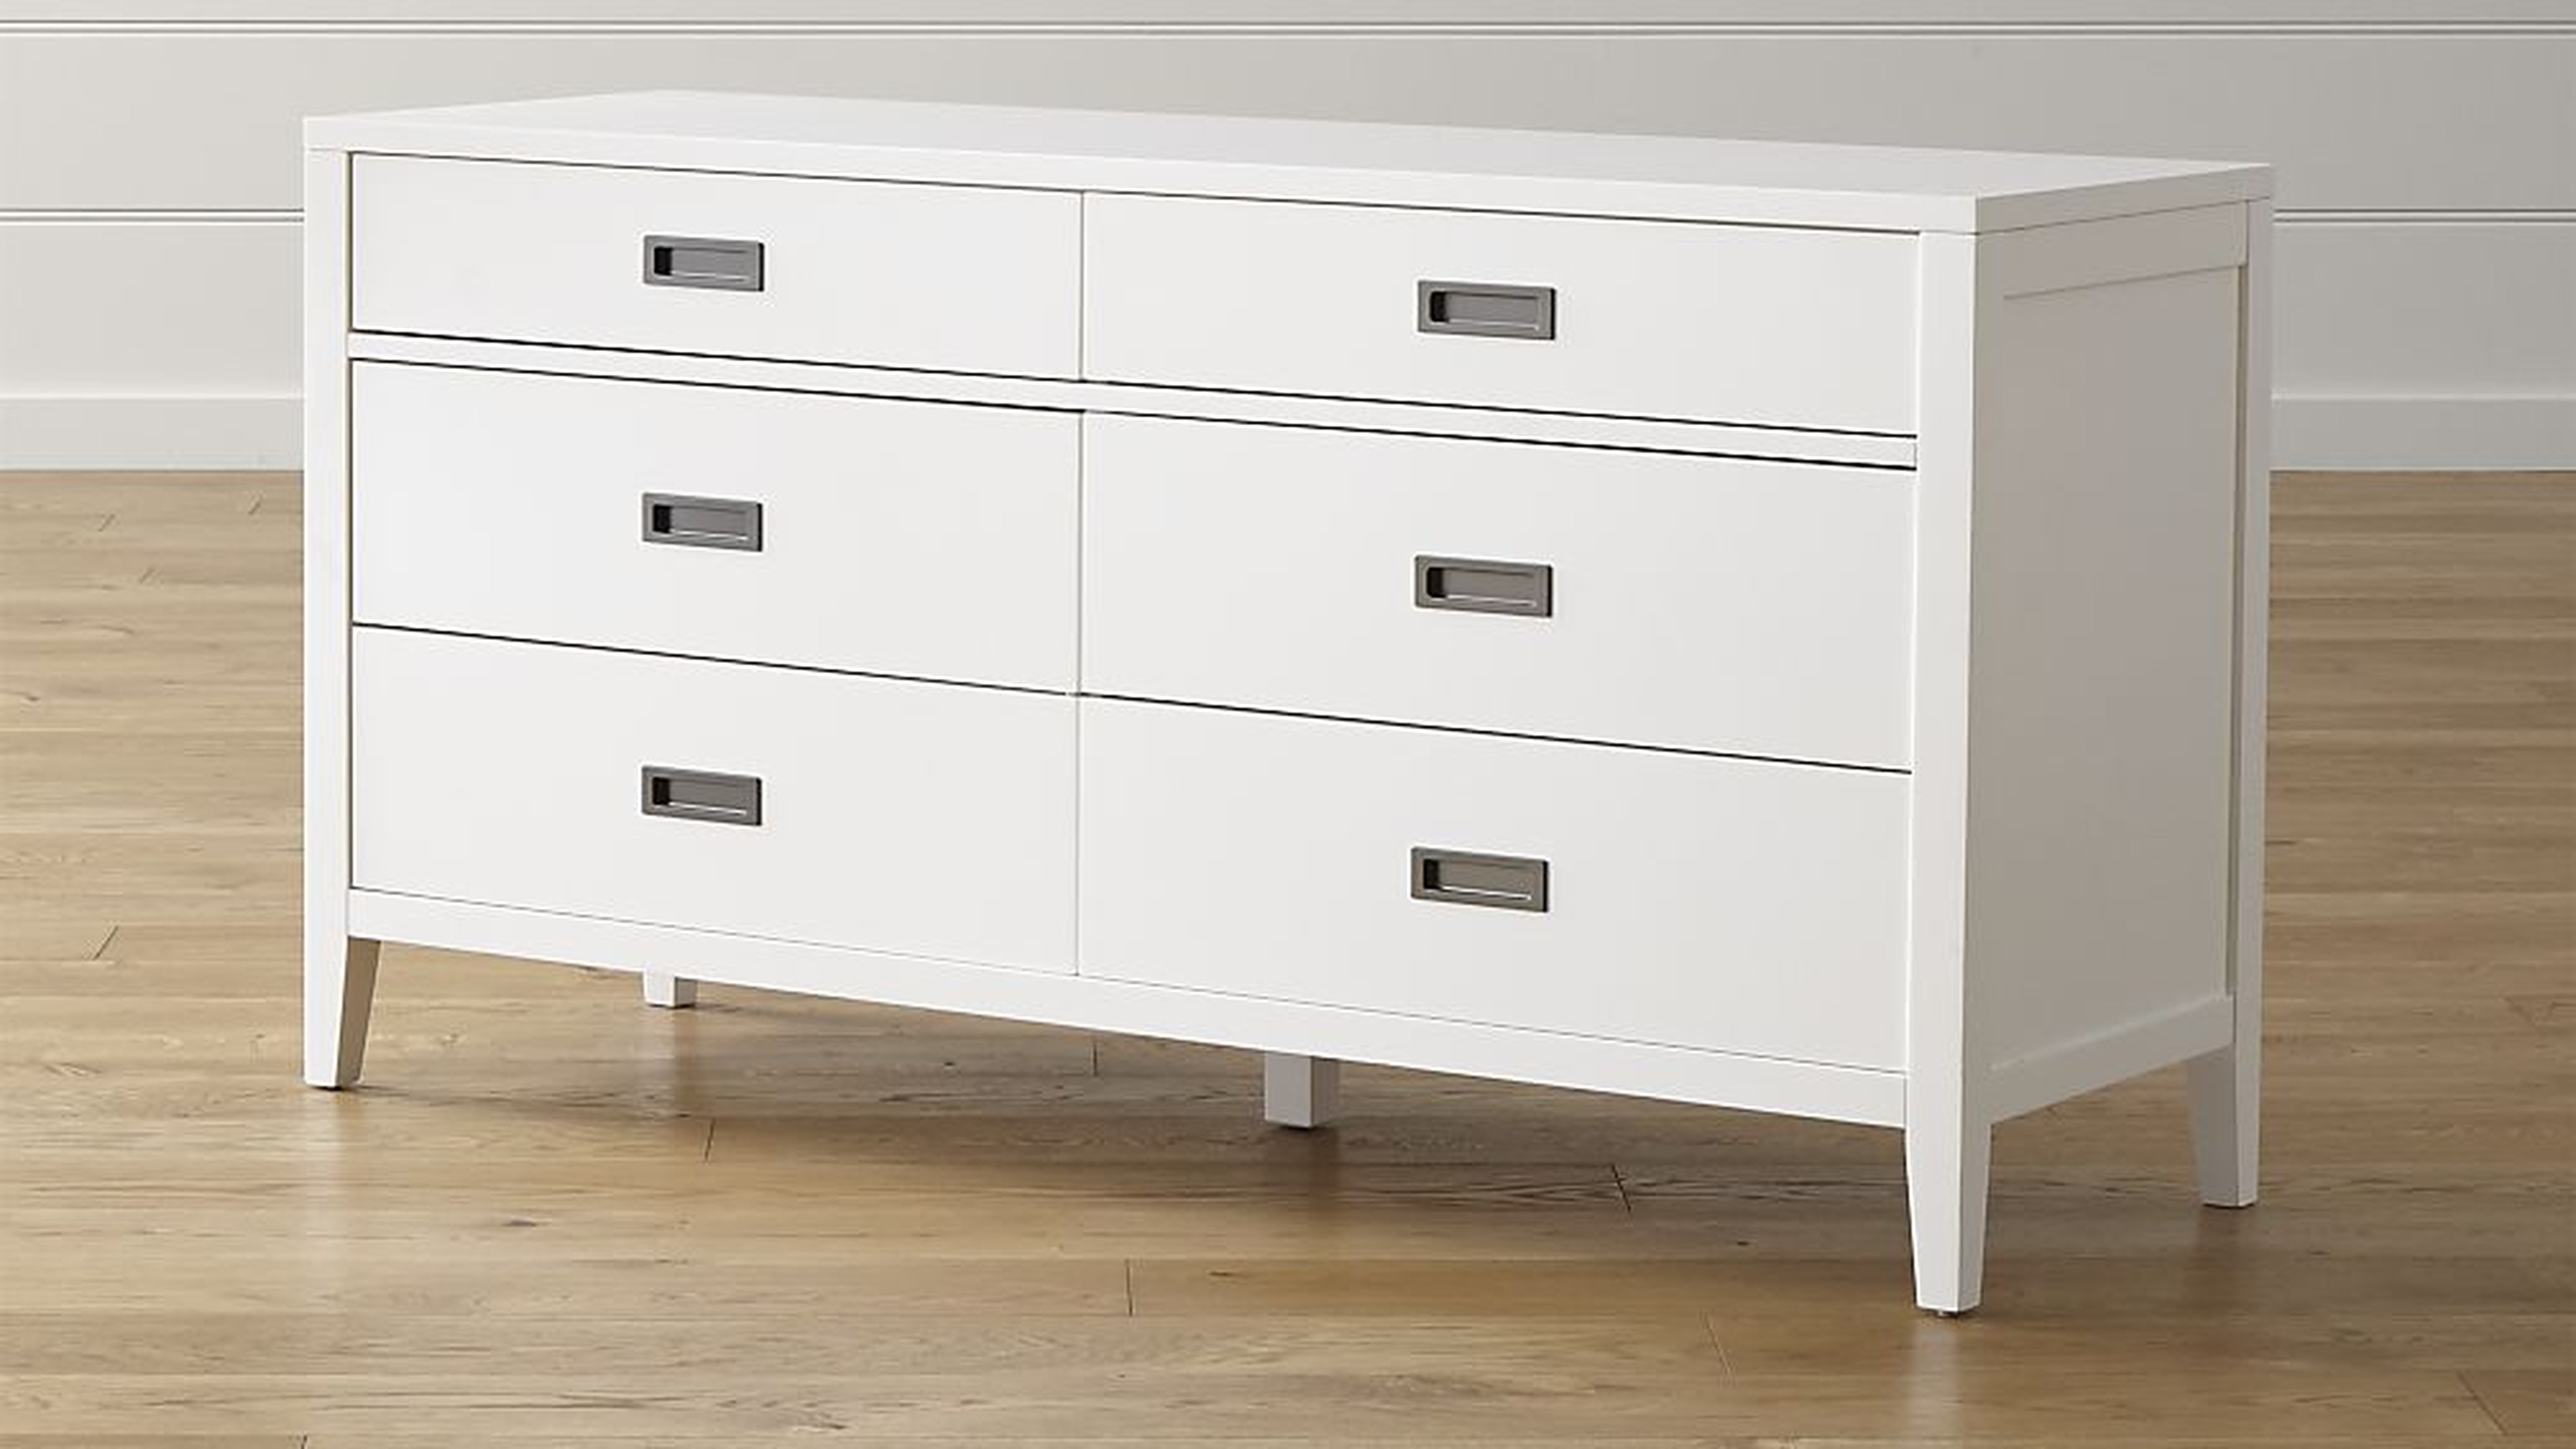 Arch White 6-Drawer Dresser - Crate and Barrel